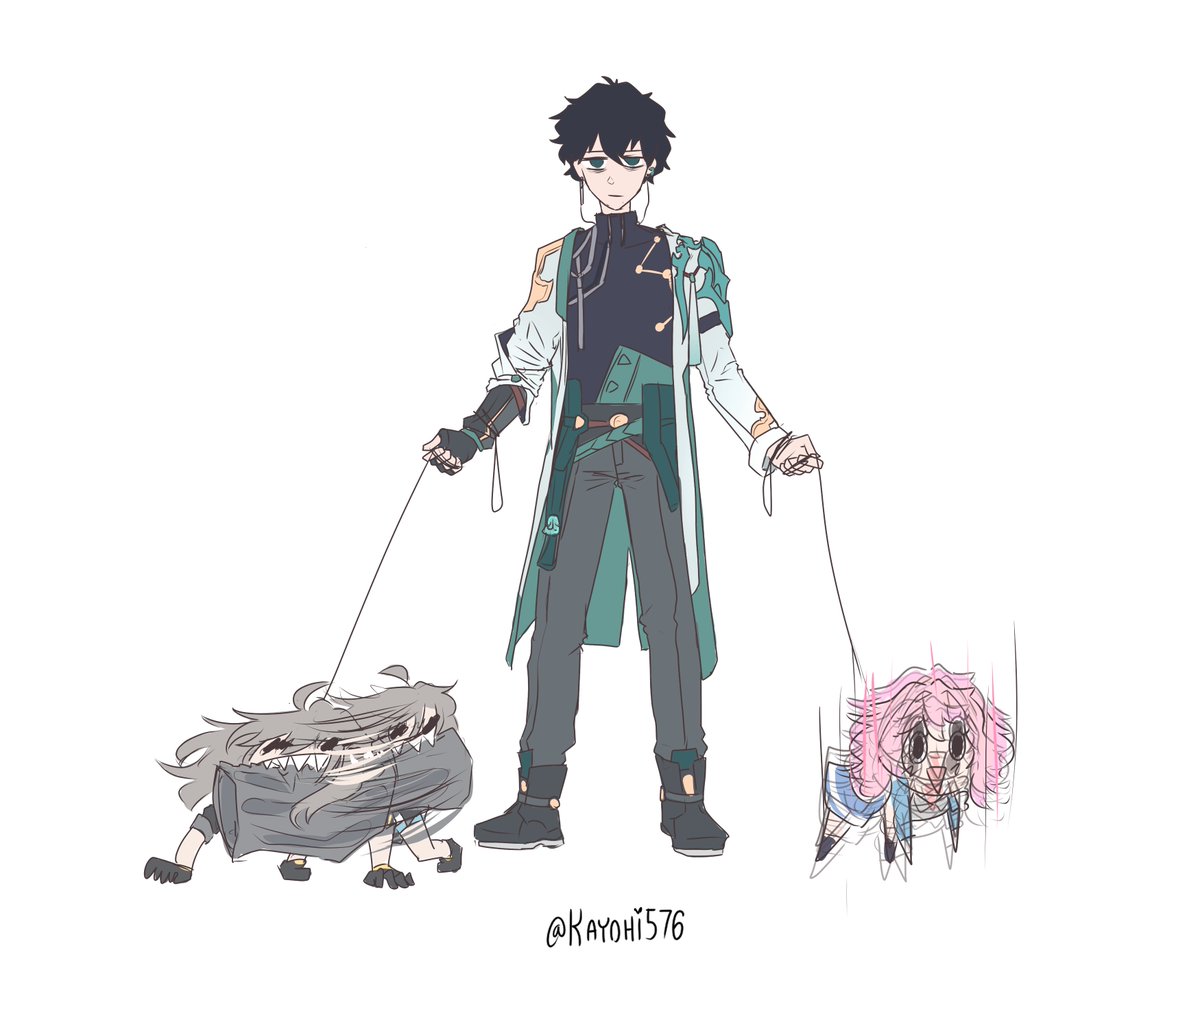 overworked dan heng and his feral companions
#HonkaiStarRail #danheng #stelle #march7th